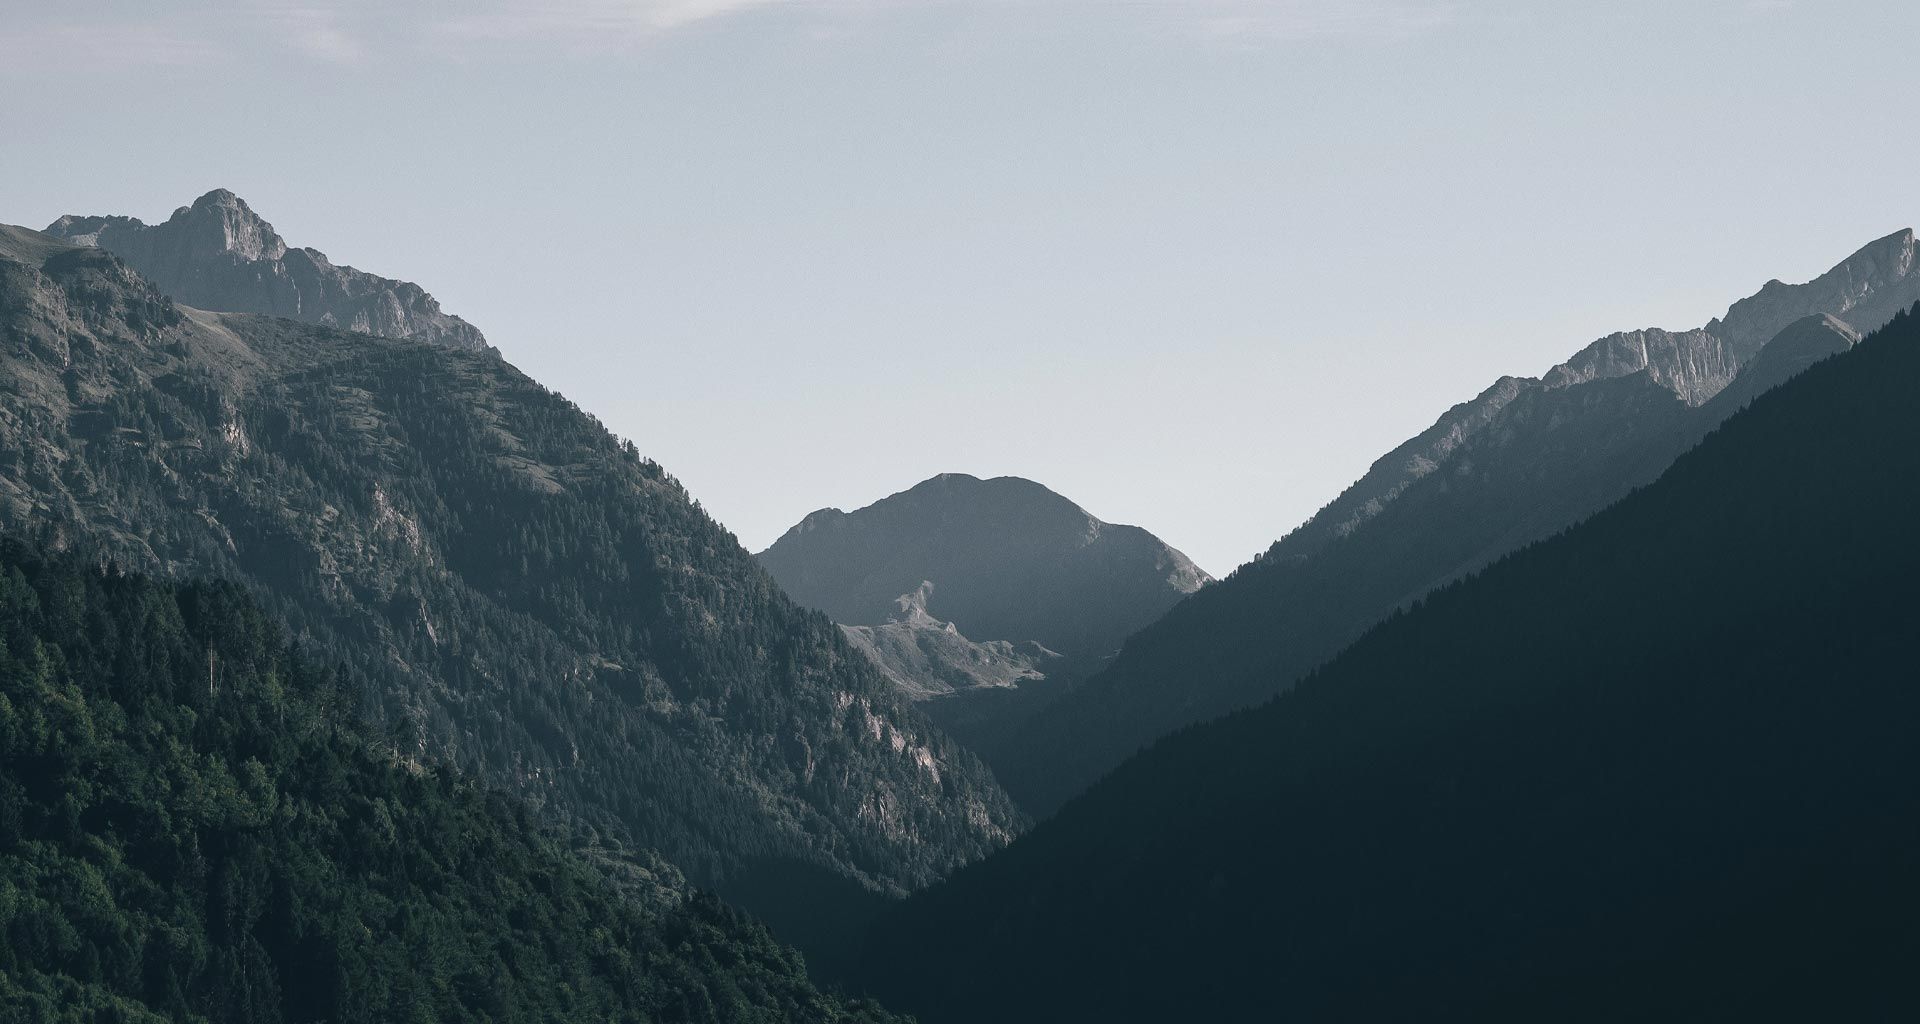 Mountains as a banner image